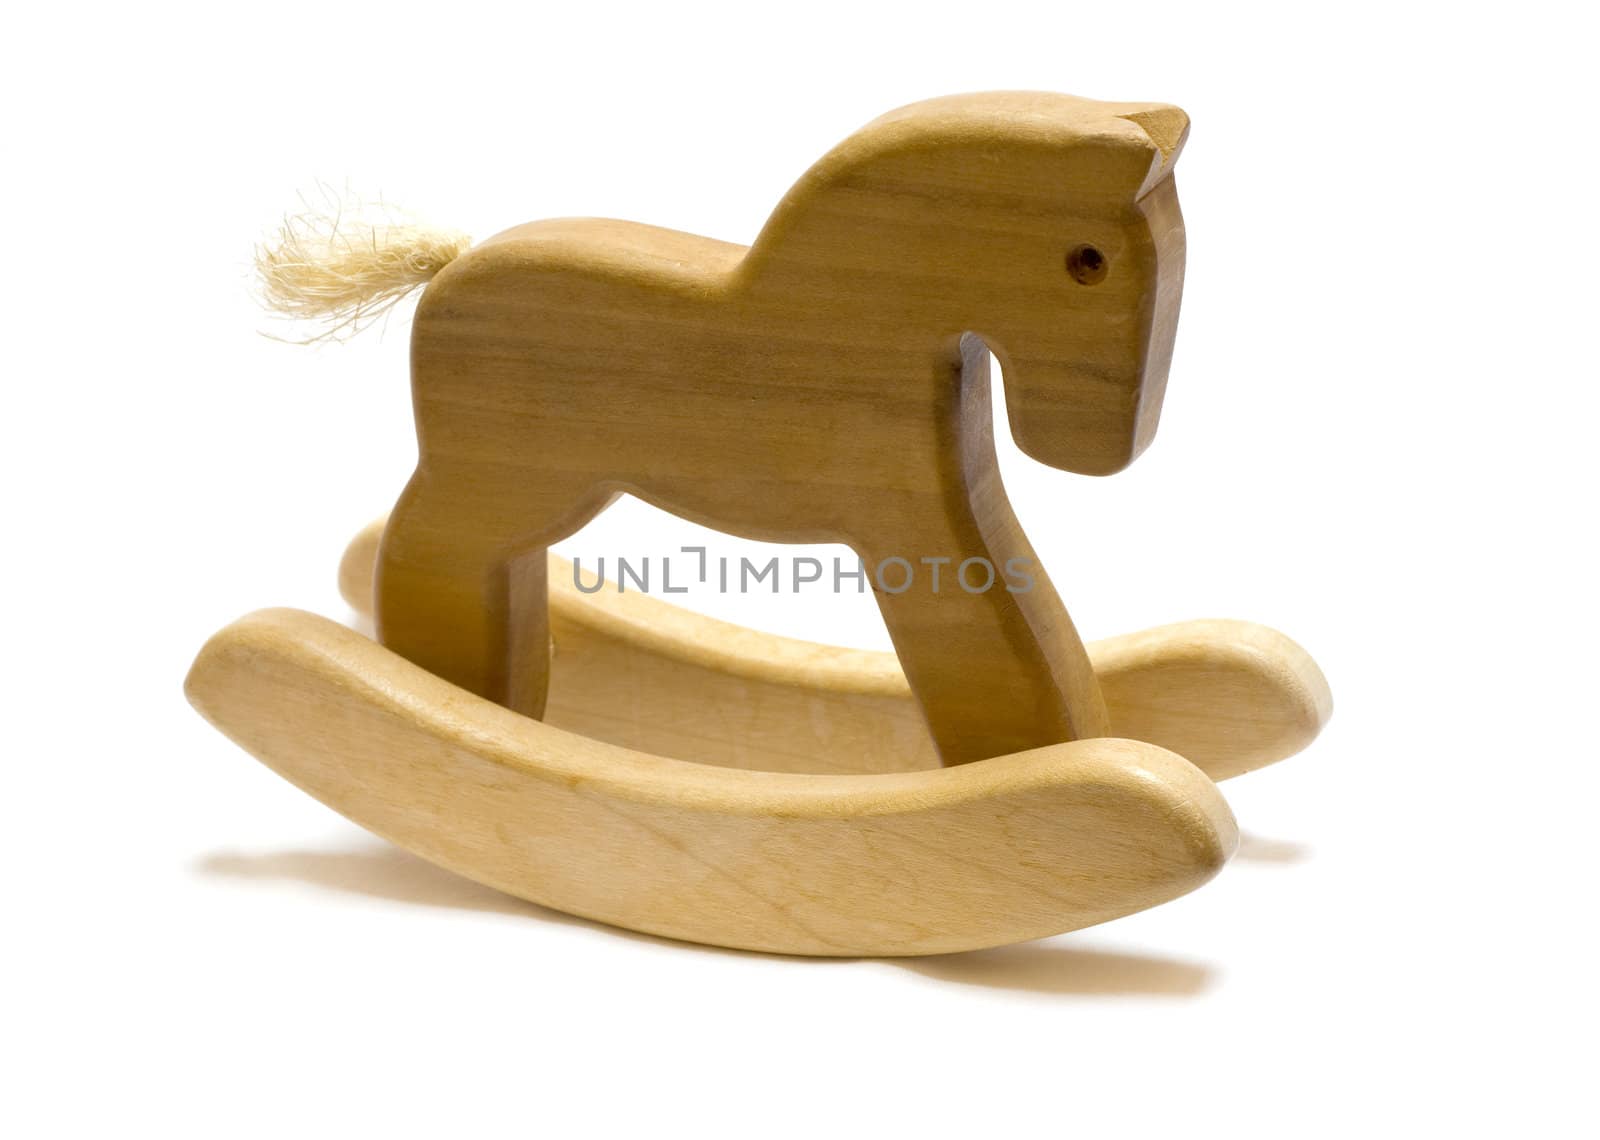 Classic homemade wooden rocking horse on white background.